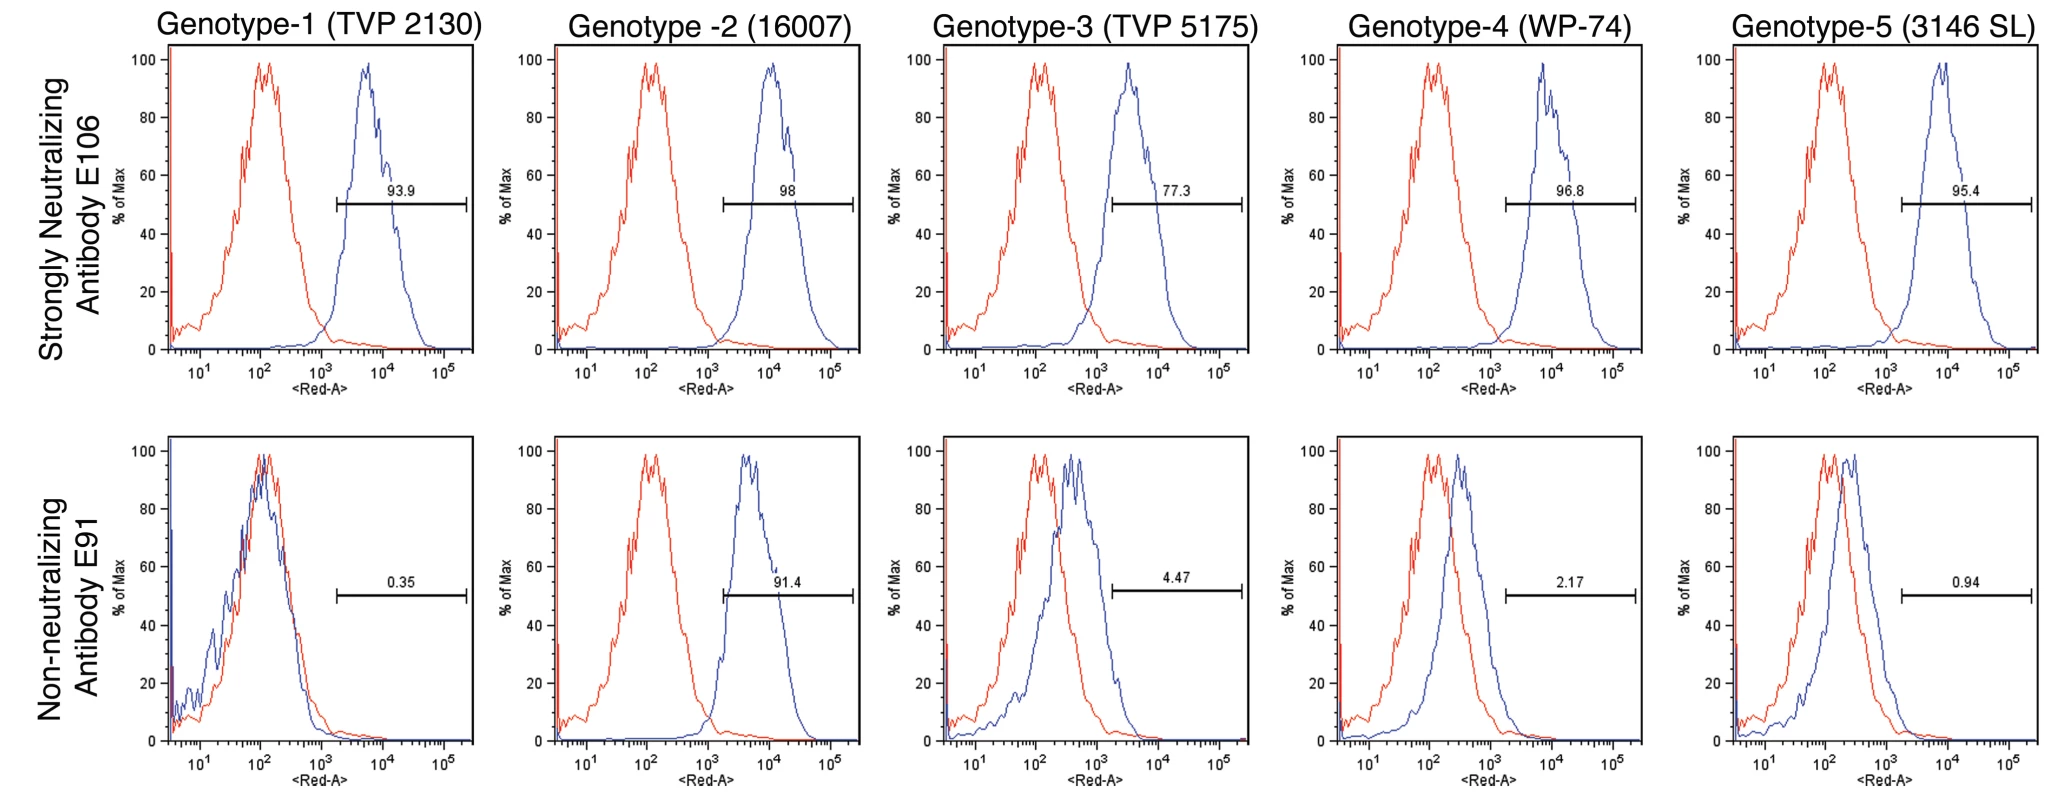 Binding of MAbs to cells infected with different genotypes of DENV-1.